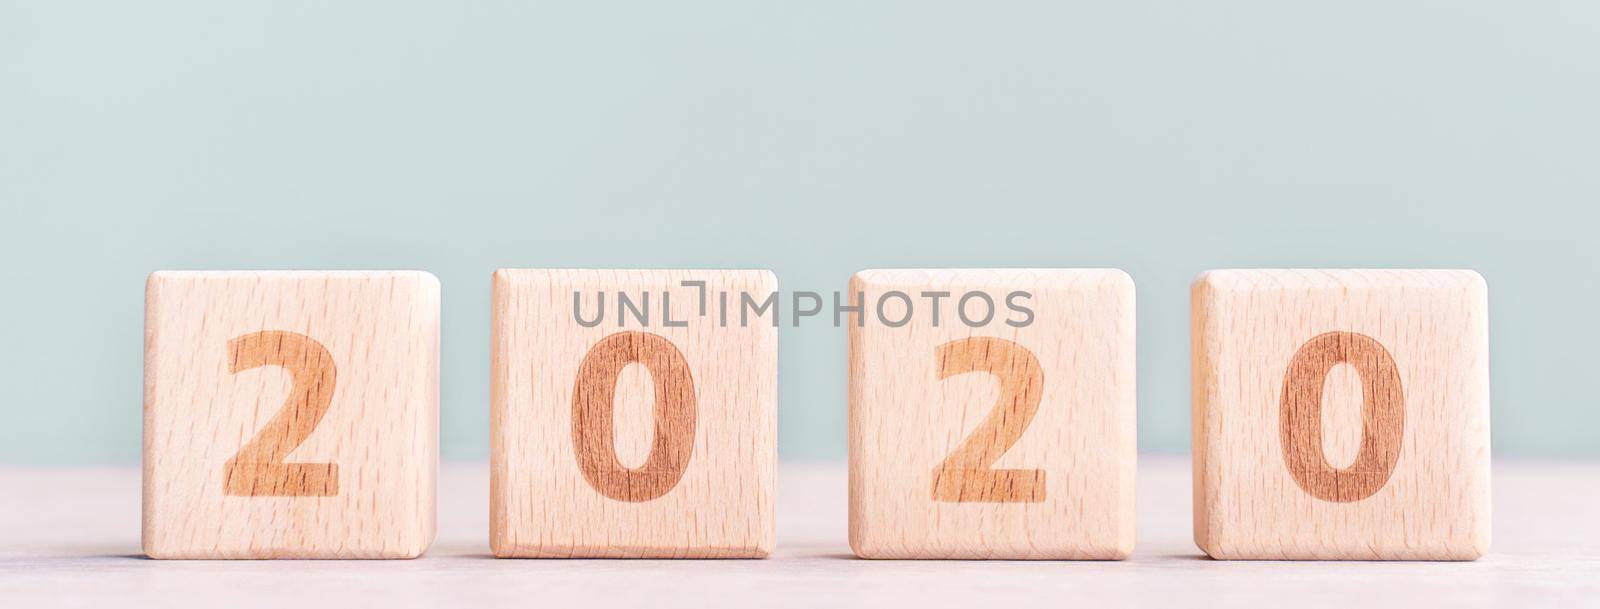 Abstract 2020, 2019 New year target plan design concept - wood blocks cubes on wooden table and pastel green background, close up, blank copy space. by ROMIXIMAGE